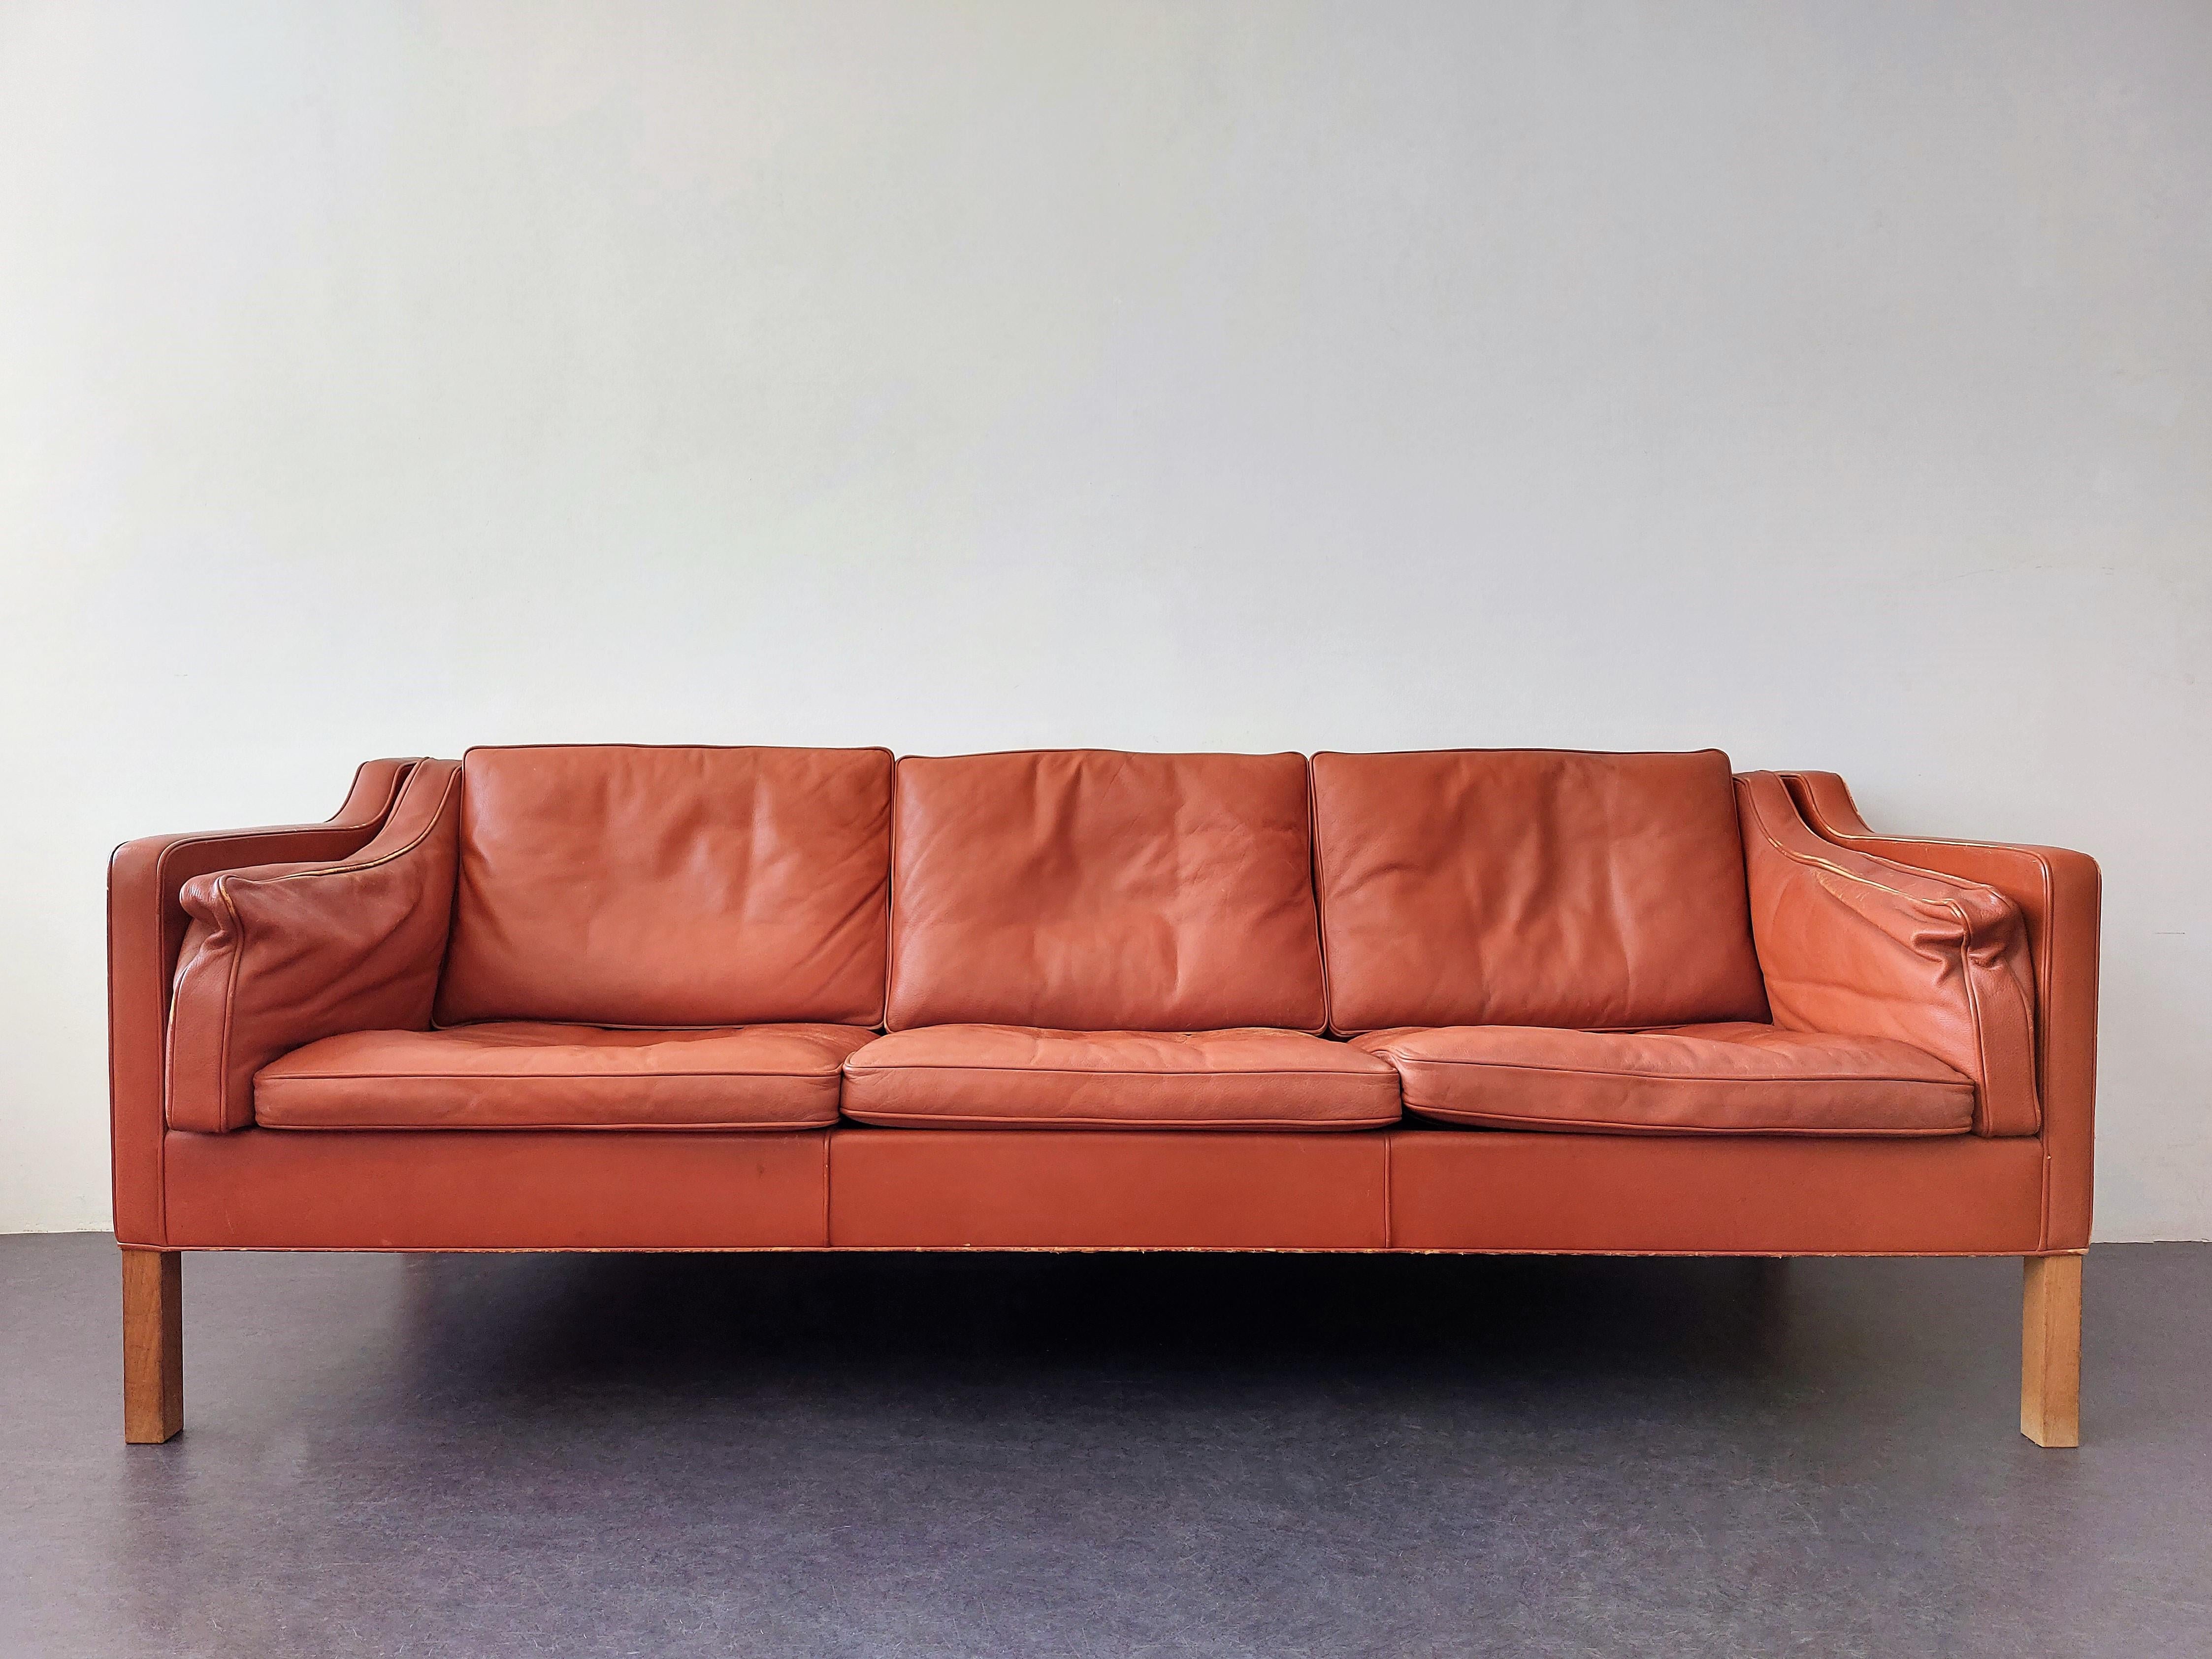 This famous and beautiful shaped 3-seater sofa, model 2213, was designed by Børge Mogensen for Fredericia Furniture in Denmark in 1962. Mogensen designed this sofa for his own living room. With a length of 222 cm, the sofa was sized exactly so that